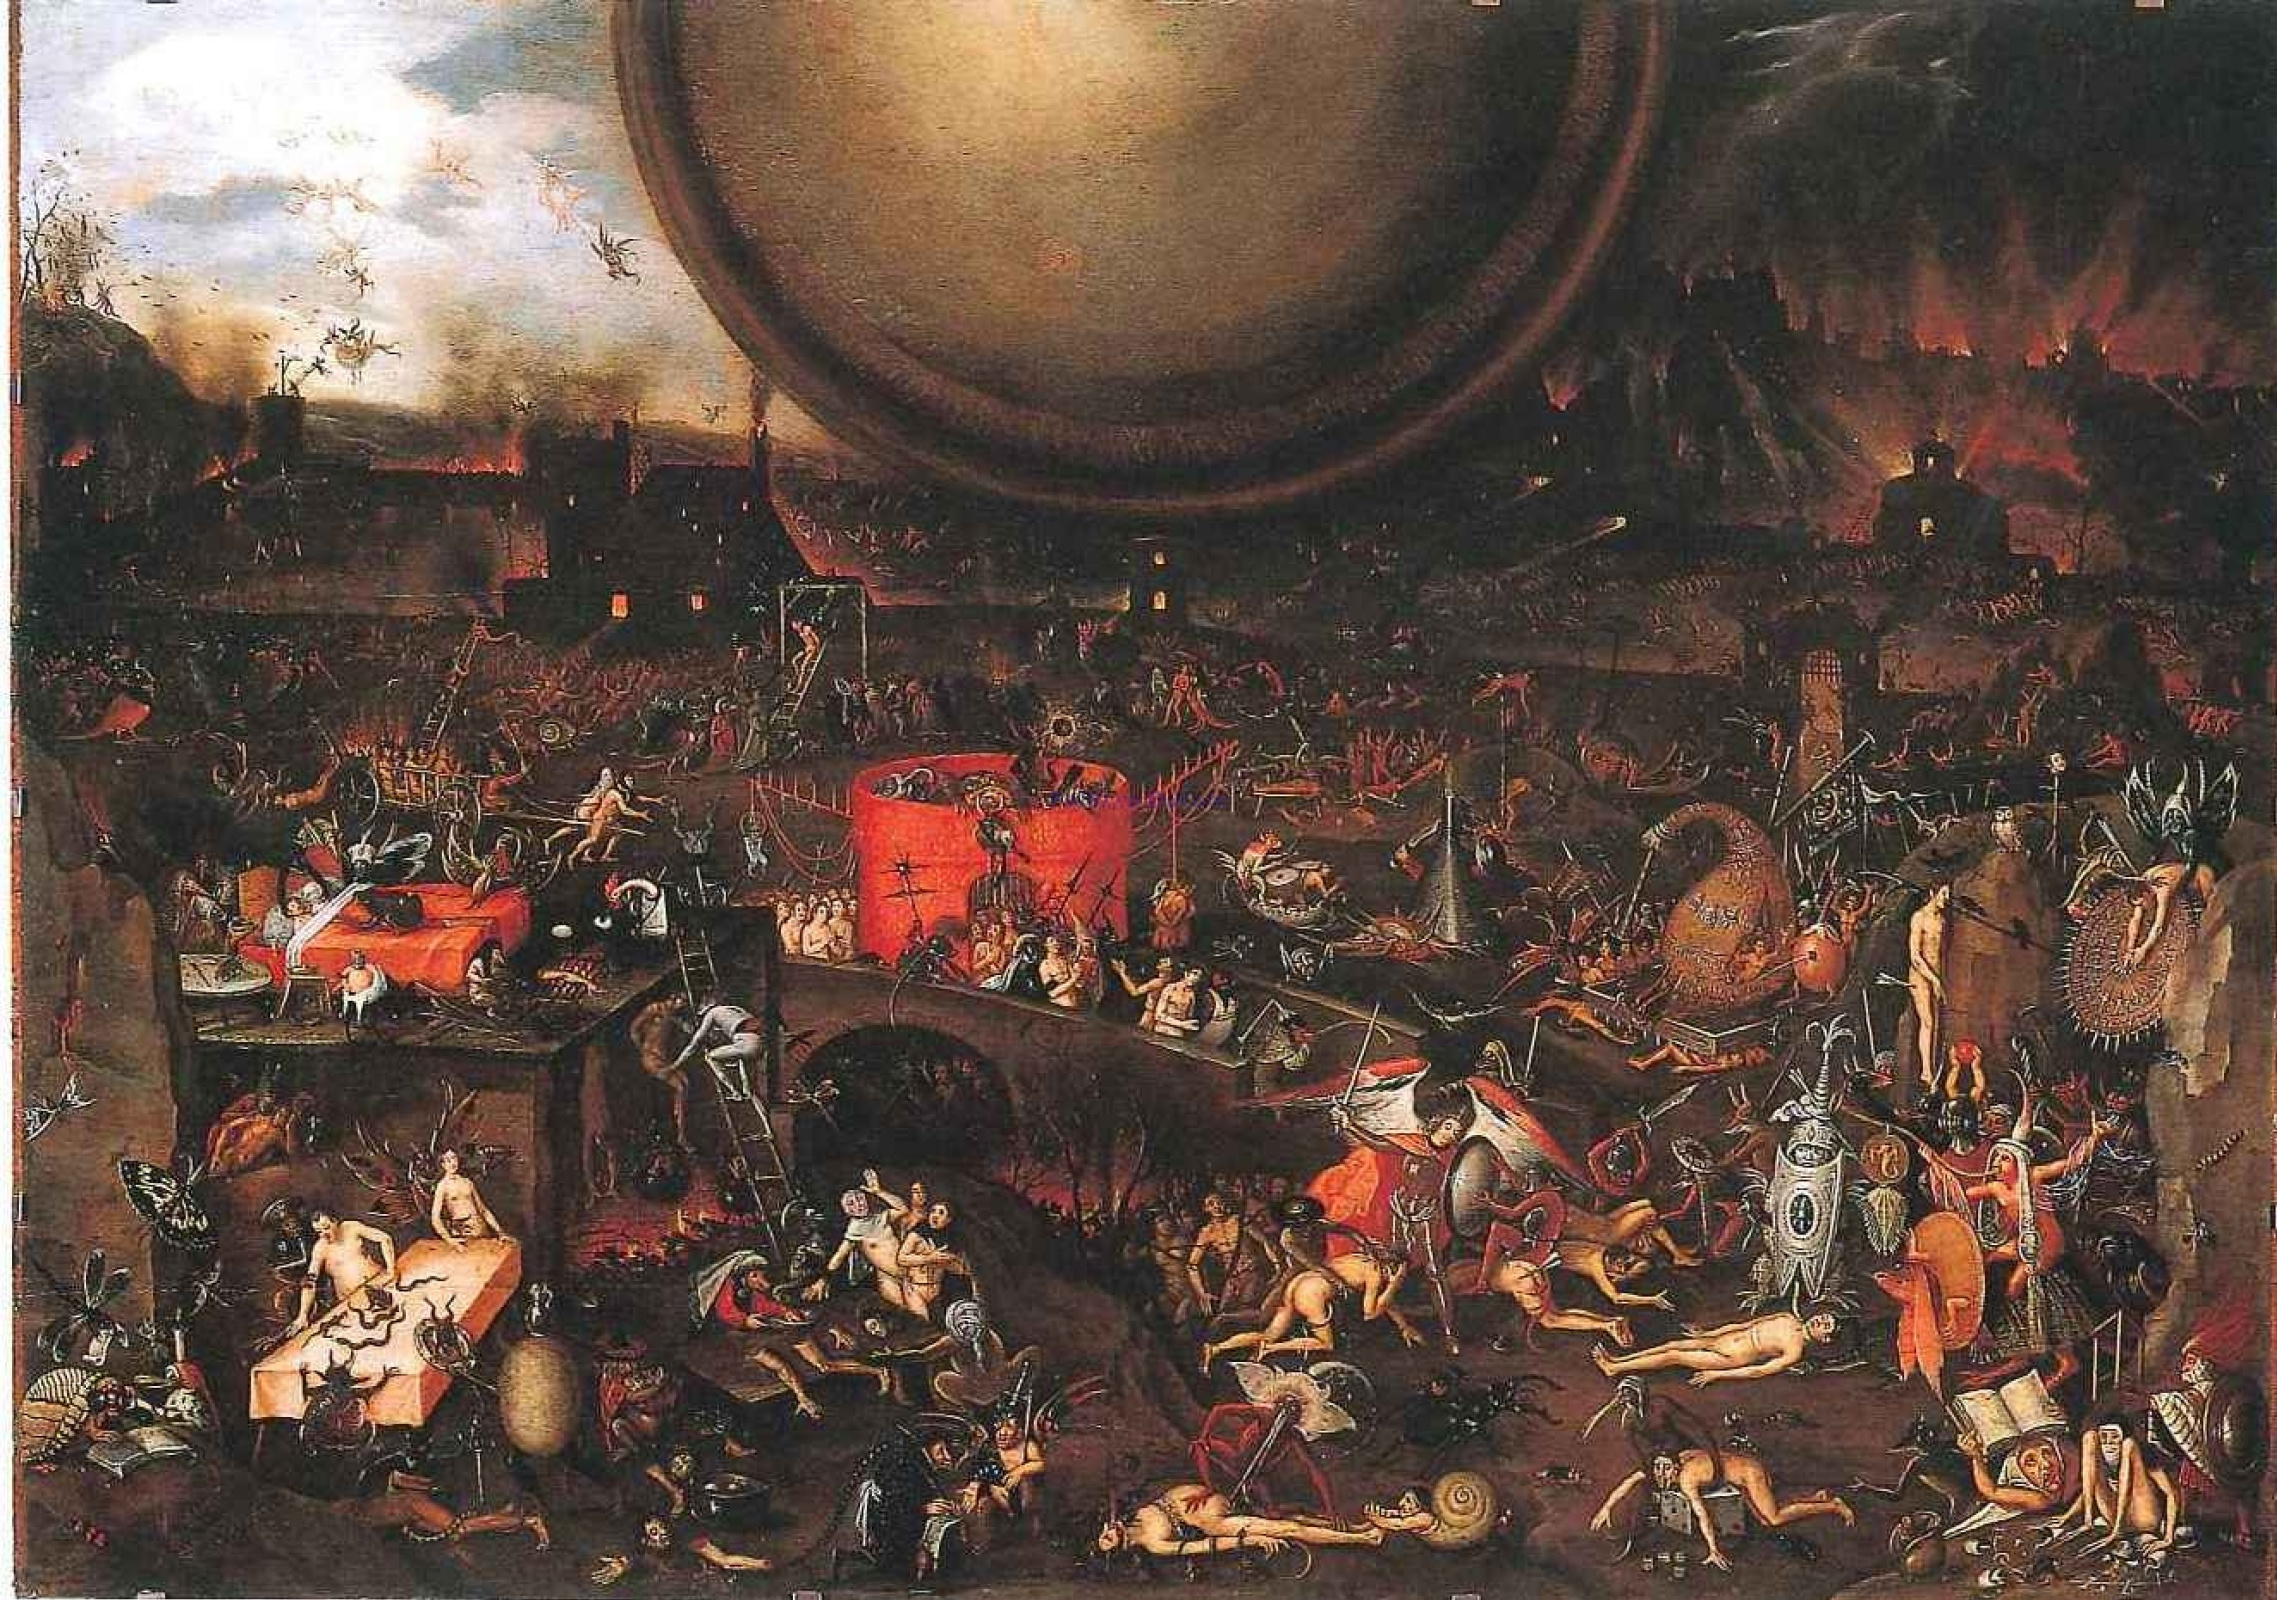 Vision of the Apocalypse - Inferno, 1595, 170×120 cm by Herry Meter de  Bles: History, Analysis & Facts | Arthive